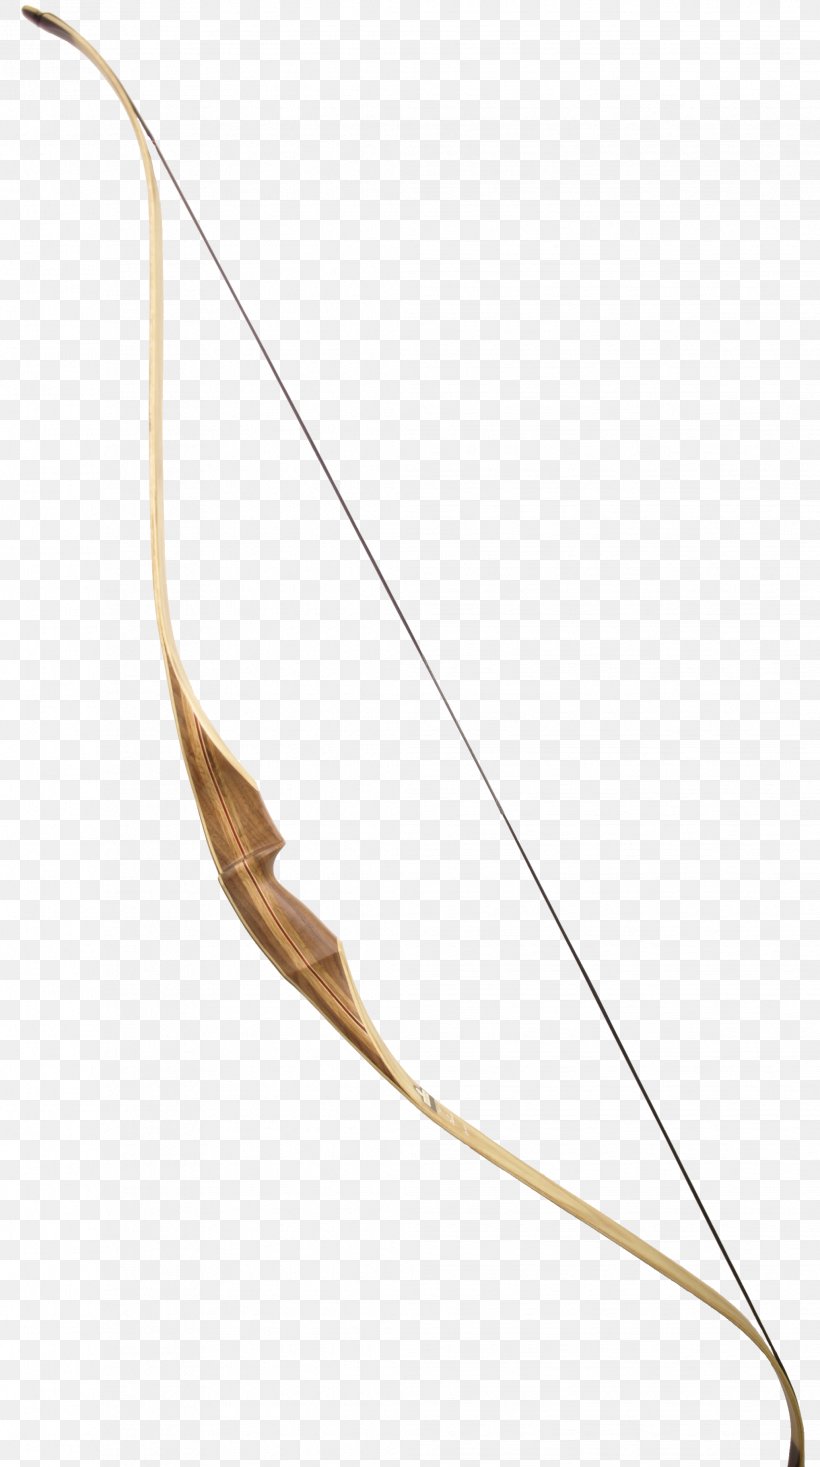 Longbow Ranged Weapon Bow And Arrow, PNG, 2038x3648px, Longbow, Bow, Bow And Arrow, Cold Weapon, Ranged Weapon Download Free